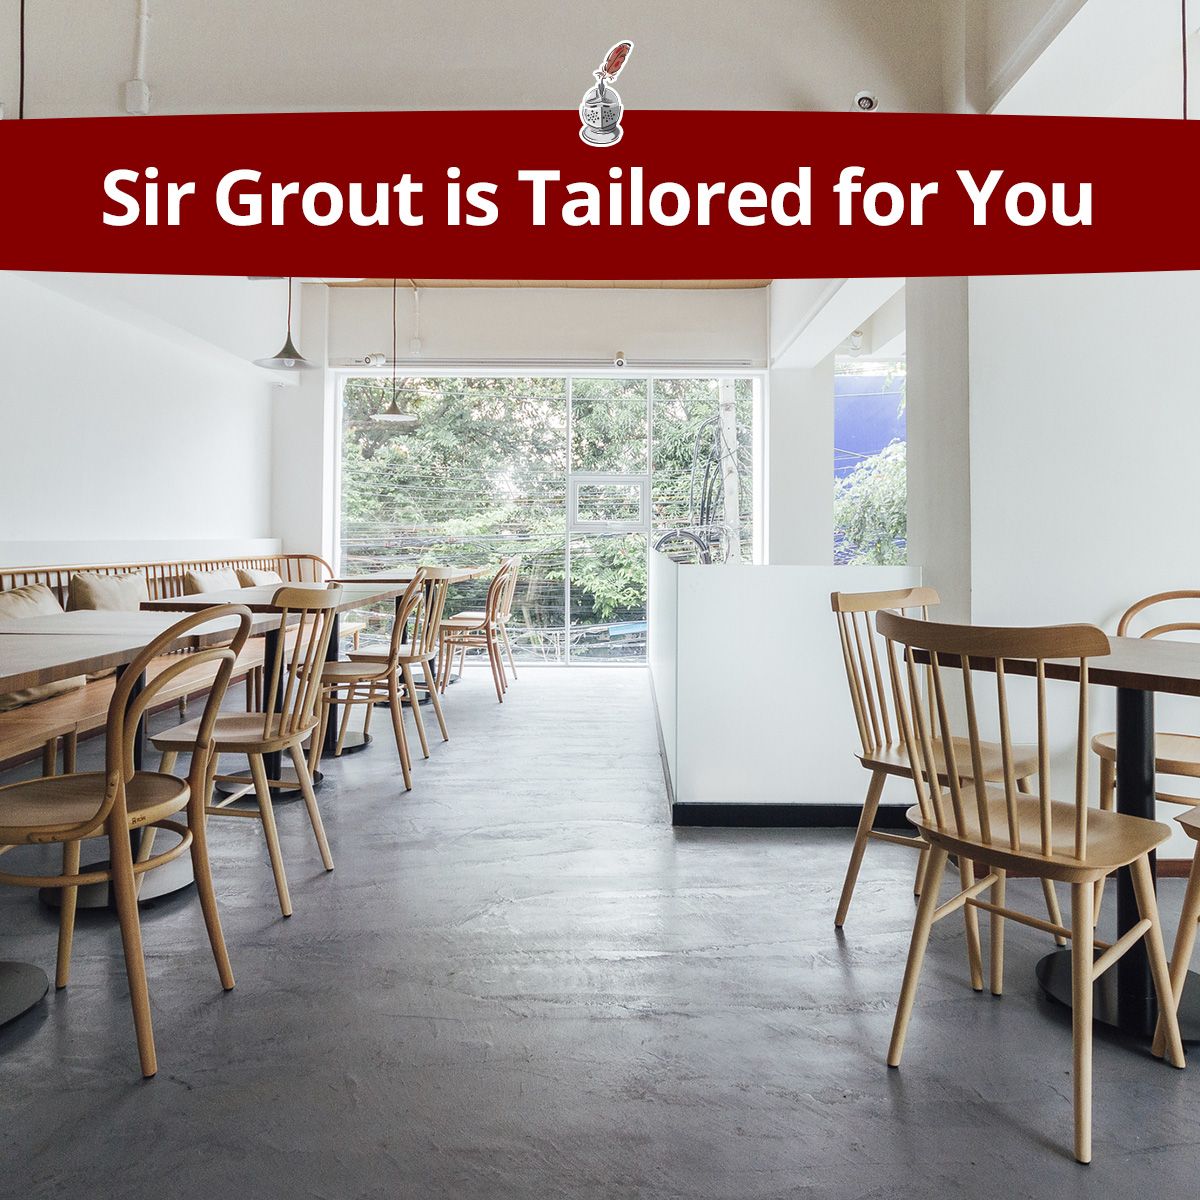 Sir Grout is Tailored for You